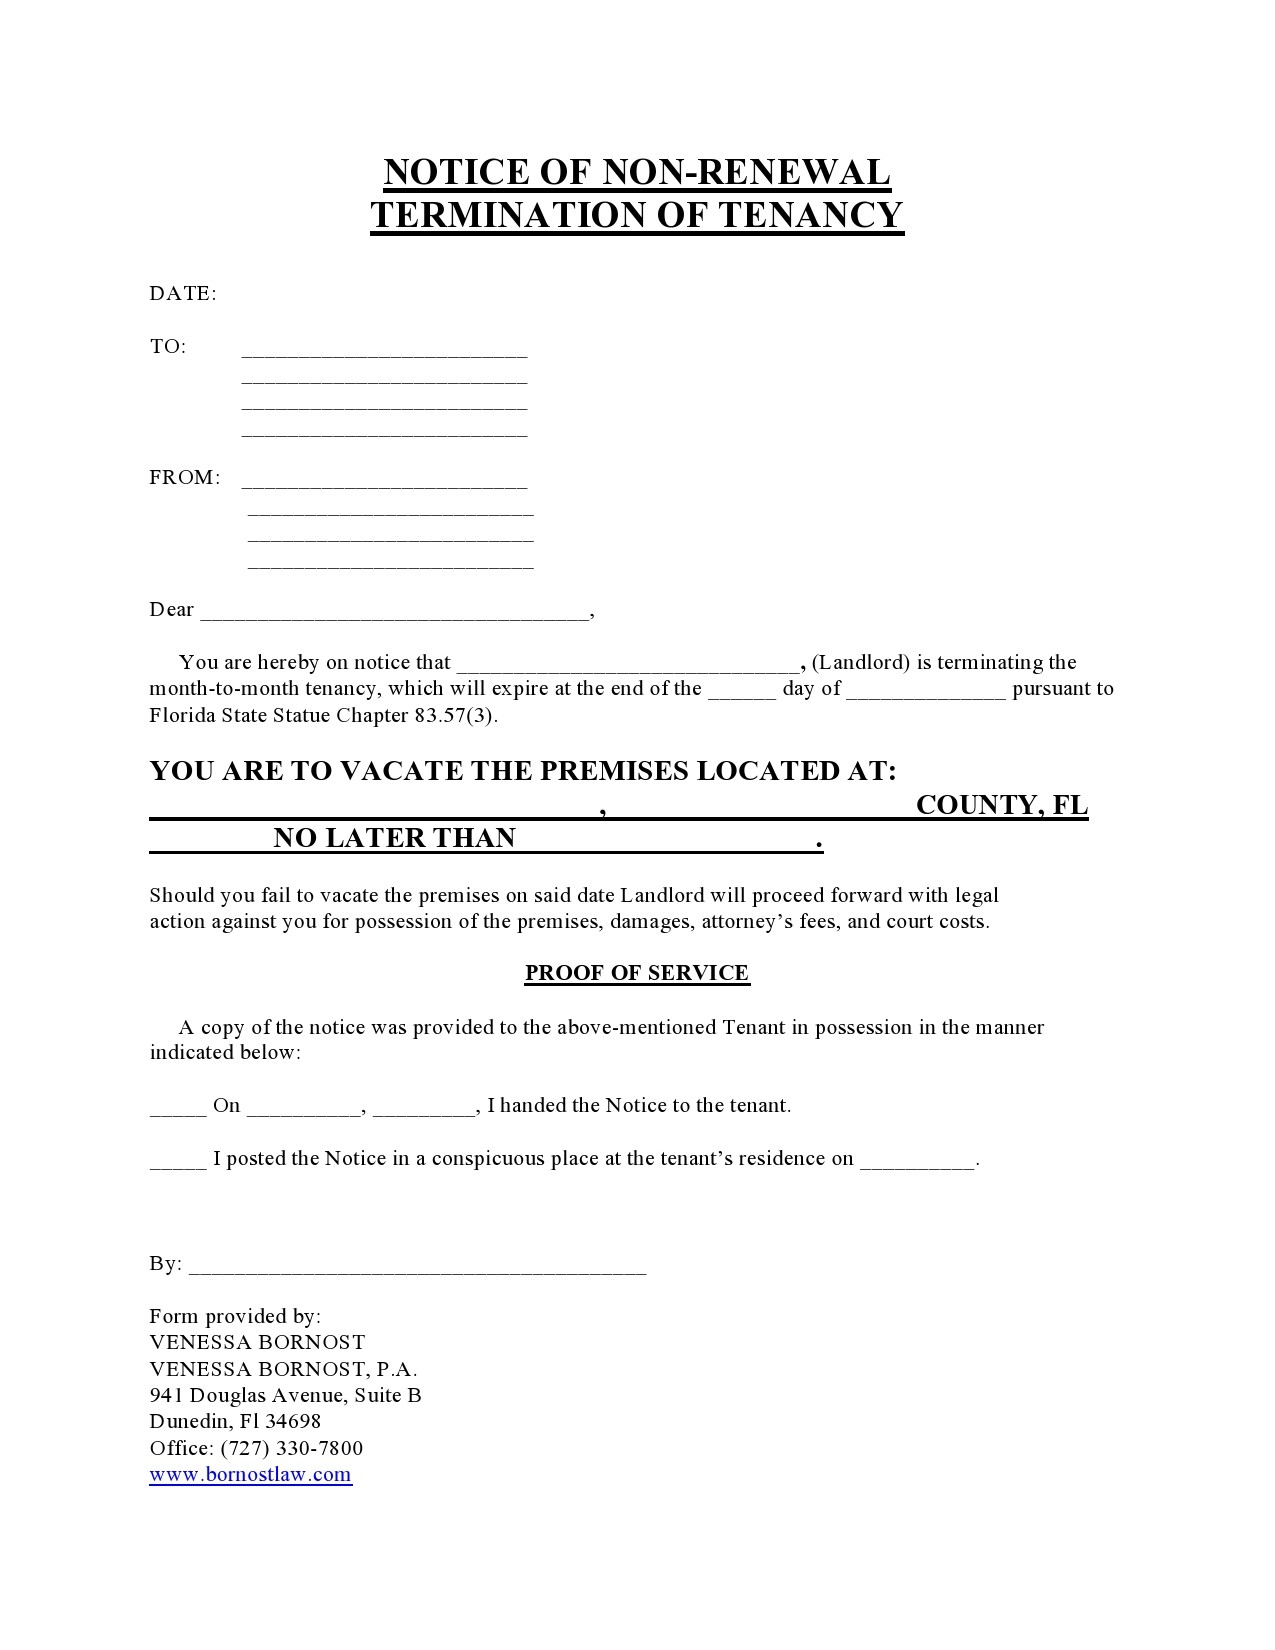 Free not renewing lease letter 09